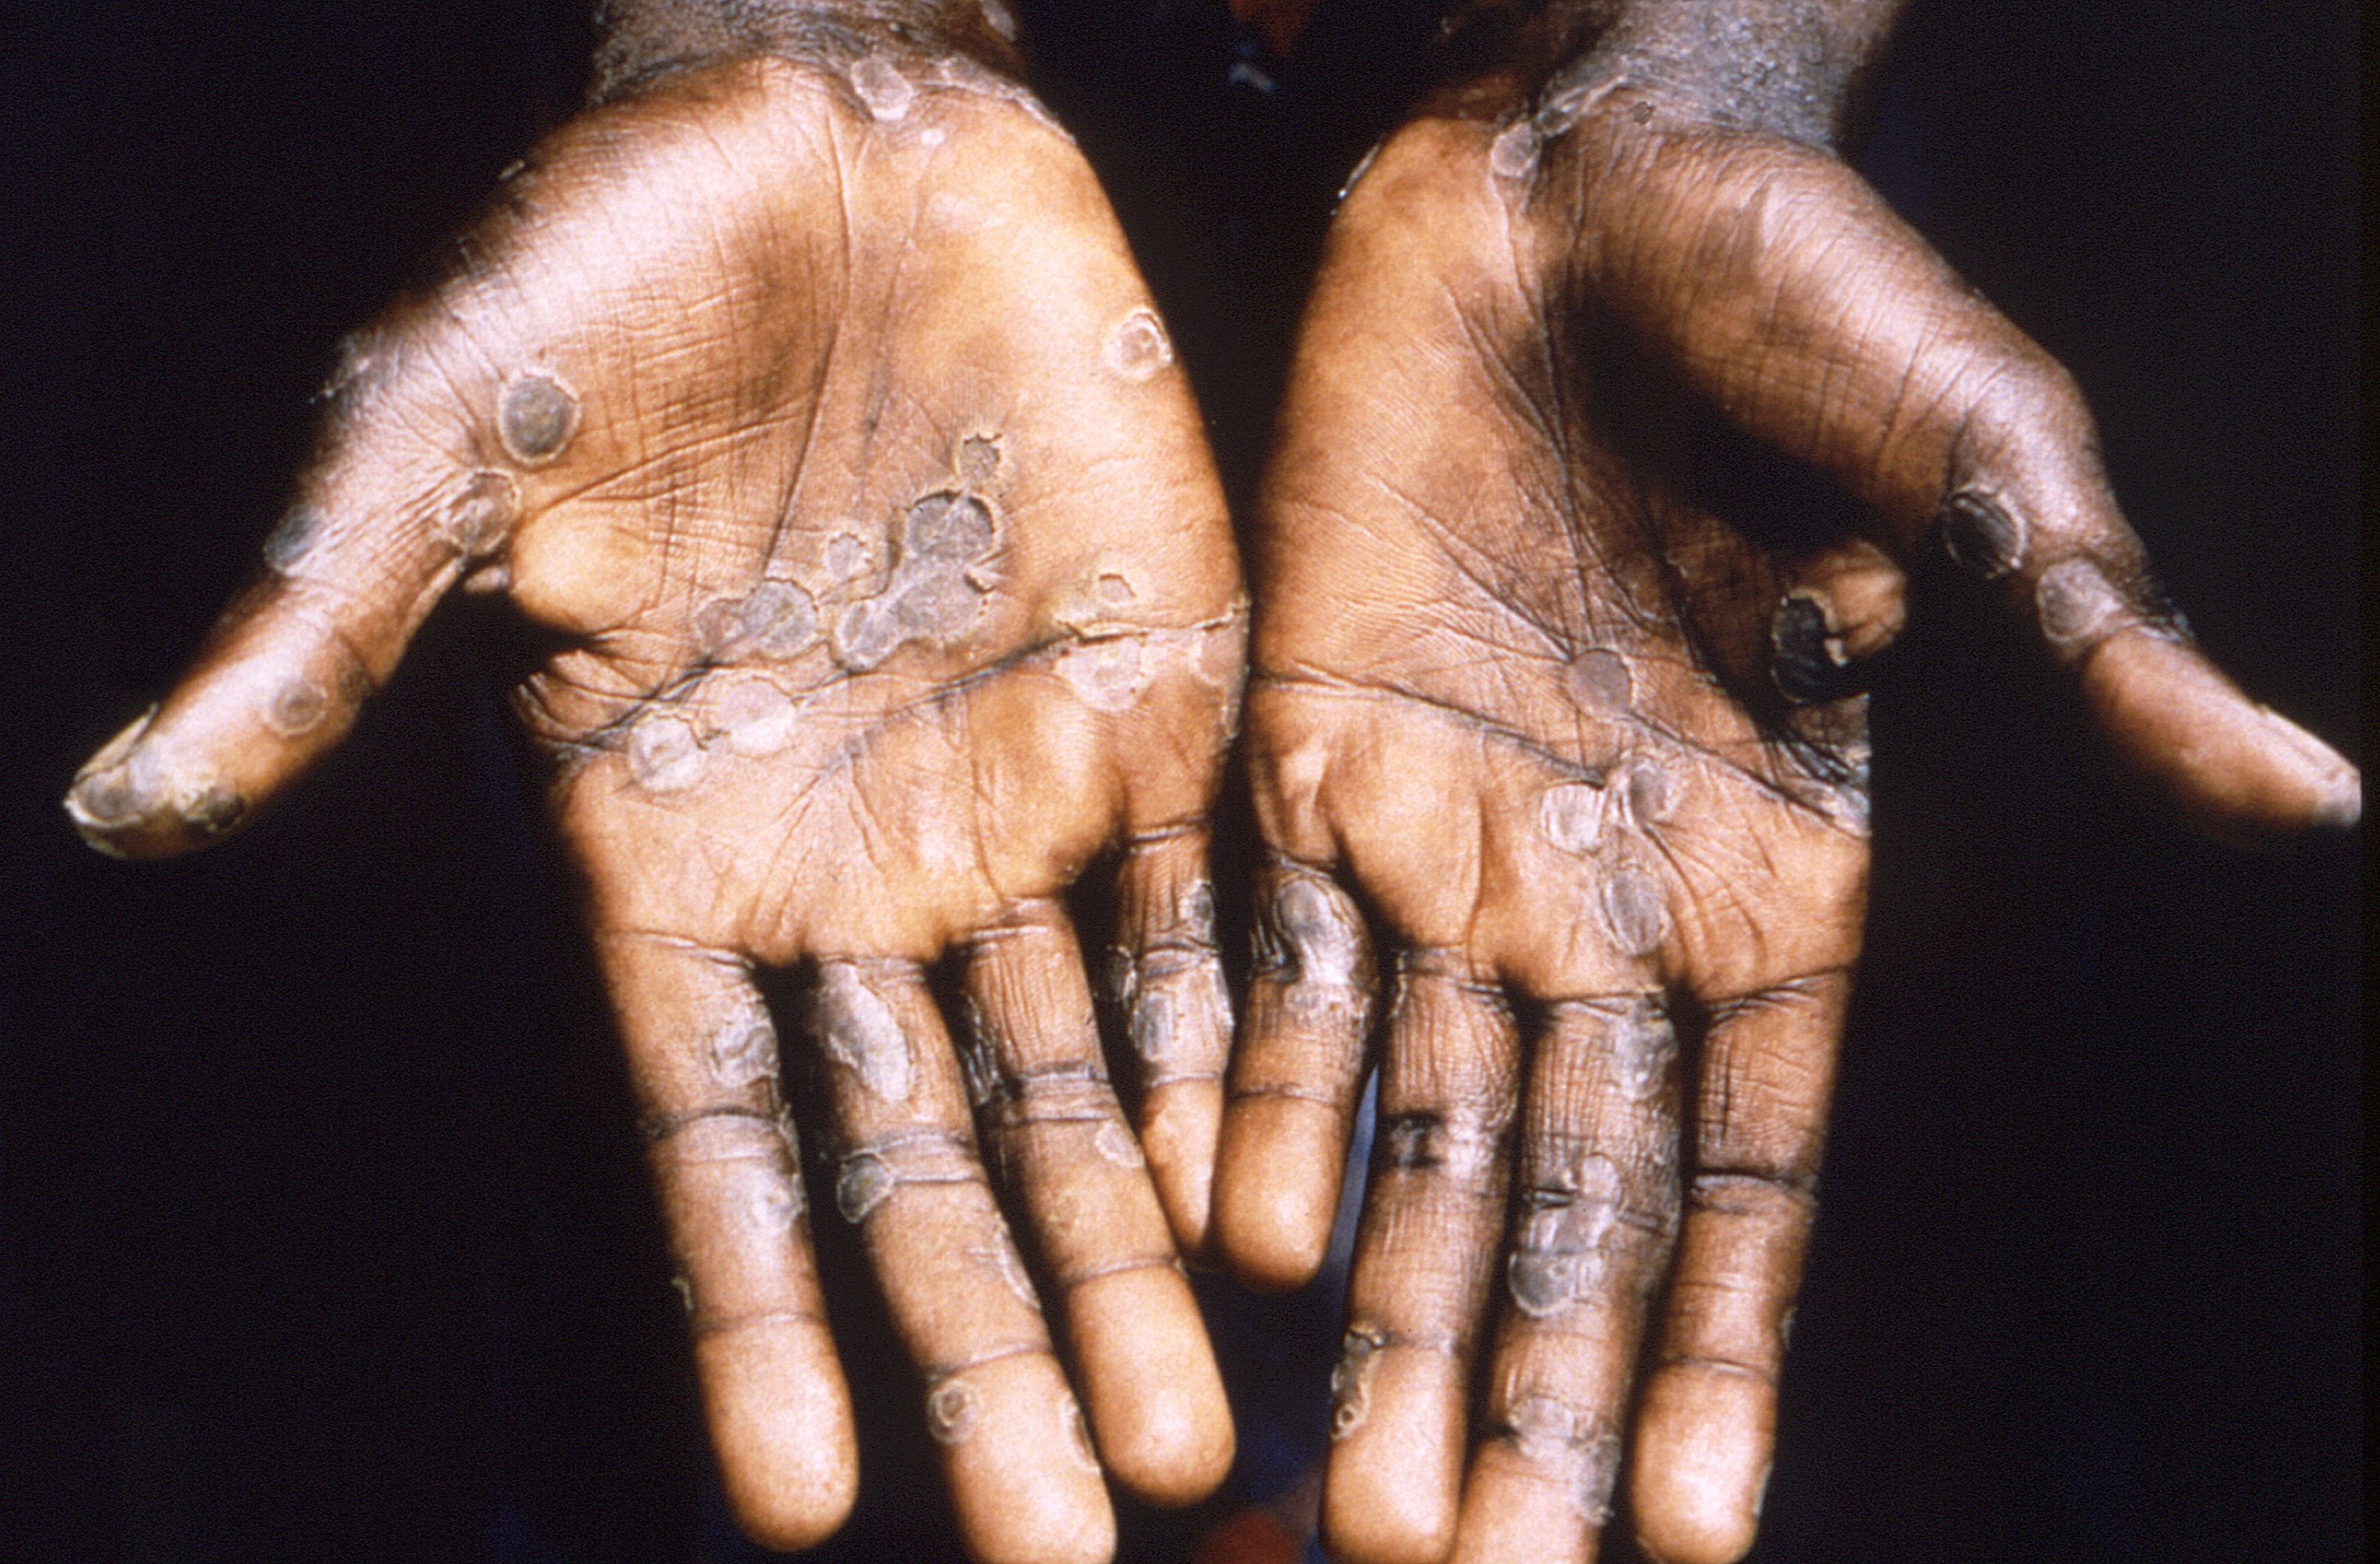 WHO expects more cases of monkeypox to emerge globally